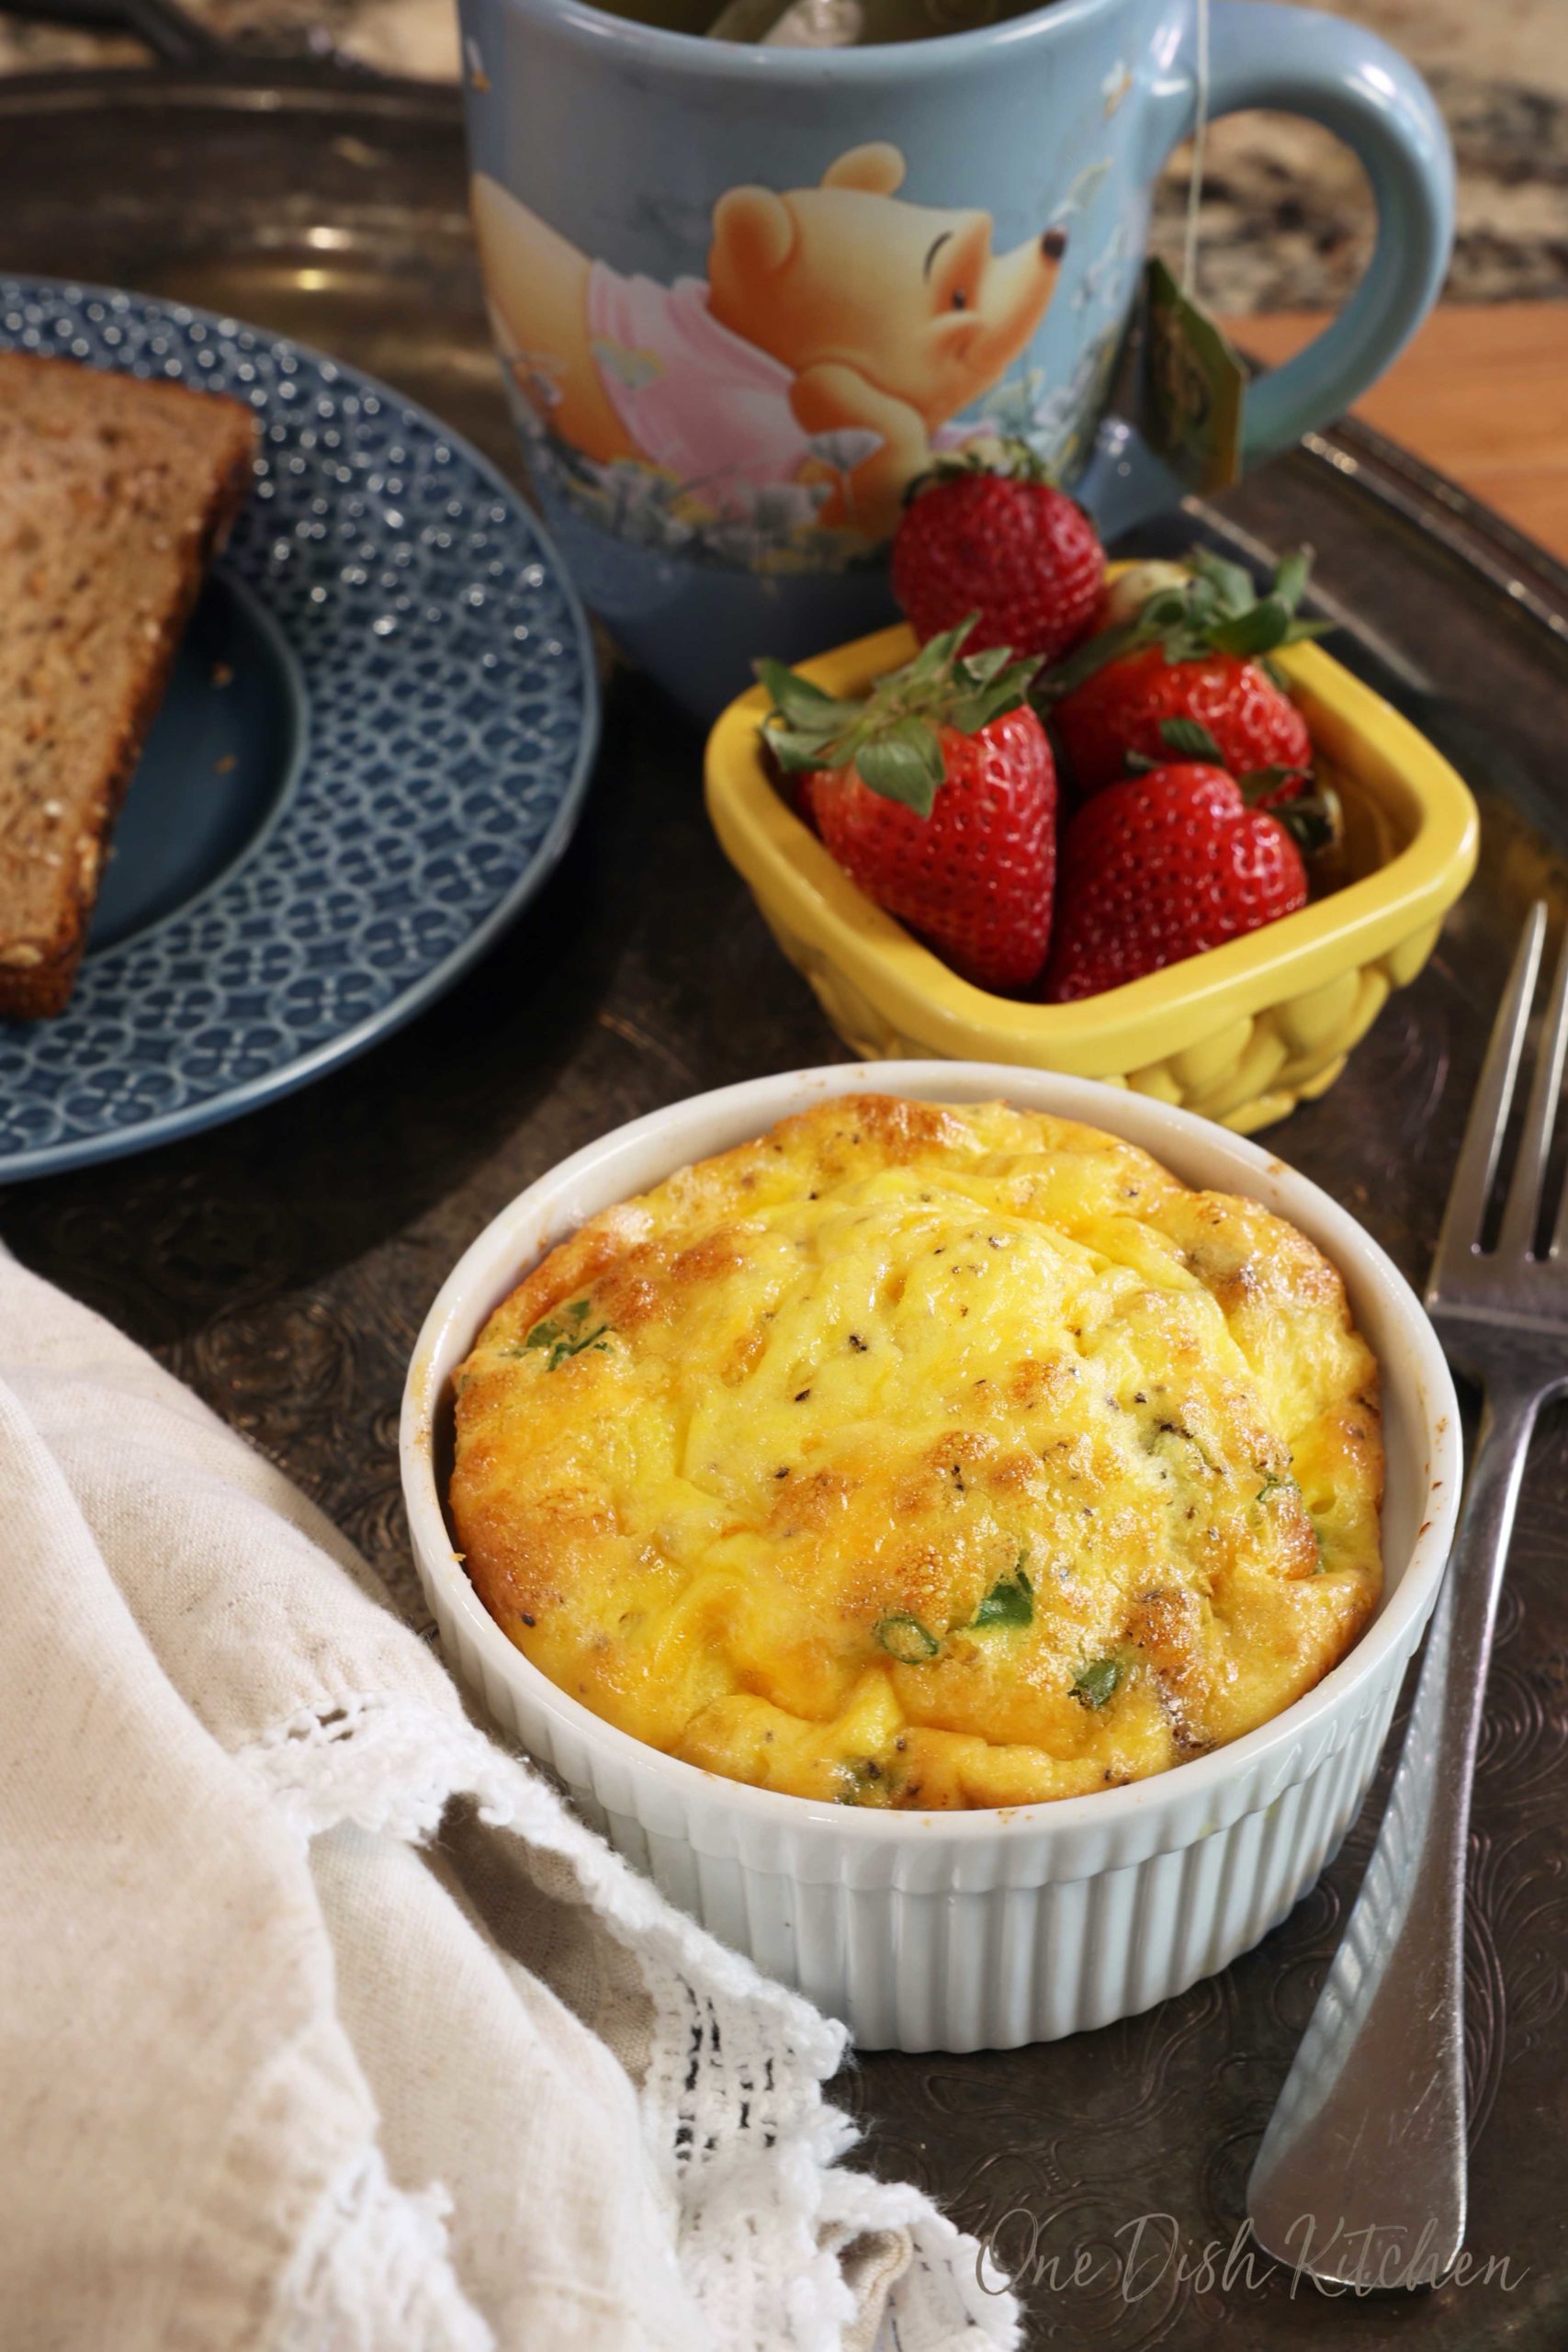 a ramekin filled with a baked egg casserole next to a bowl of strawberries and a cup of tea.